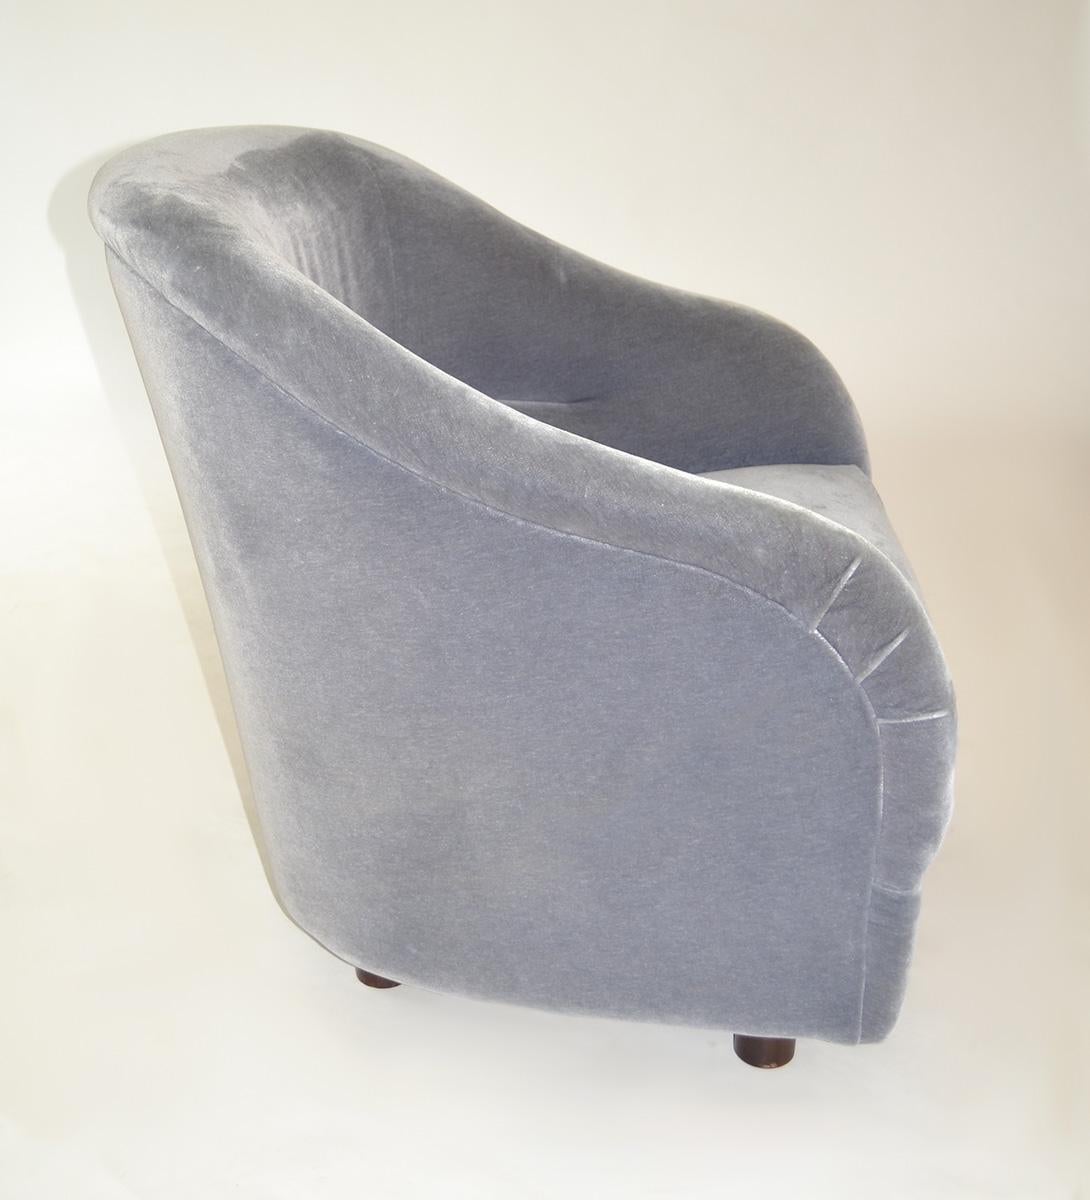 American Pair of Signed Ward Bennett for Brickell Assoc Tub Lounge Chairs in Gray Mohair For Sale